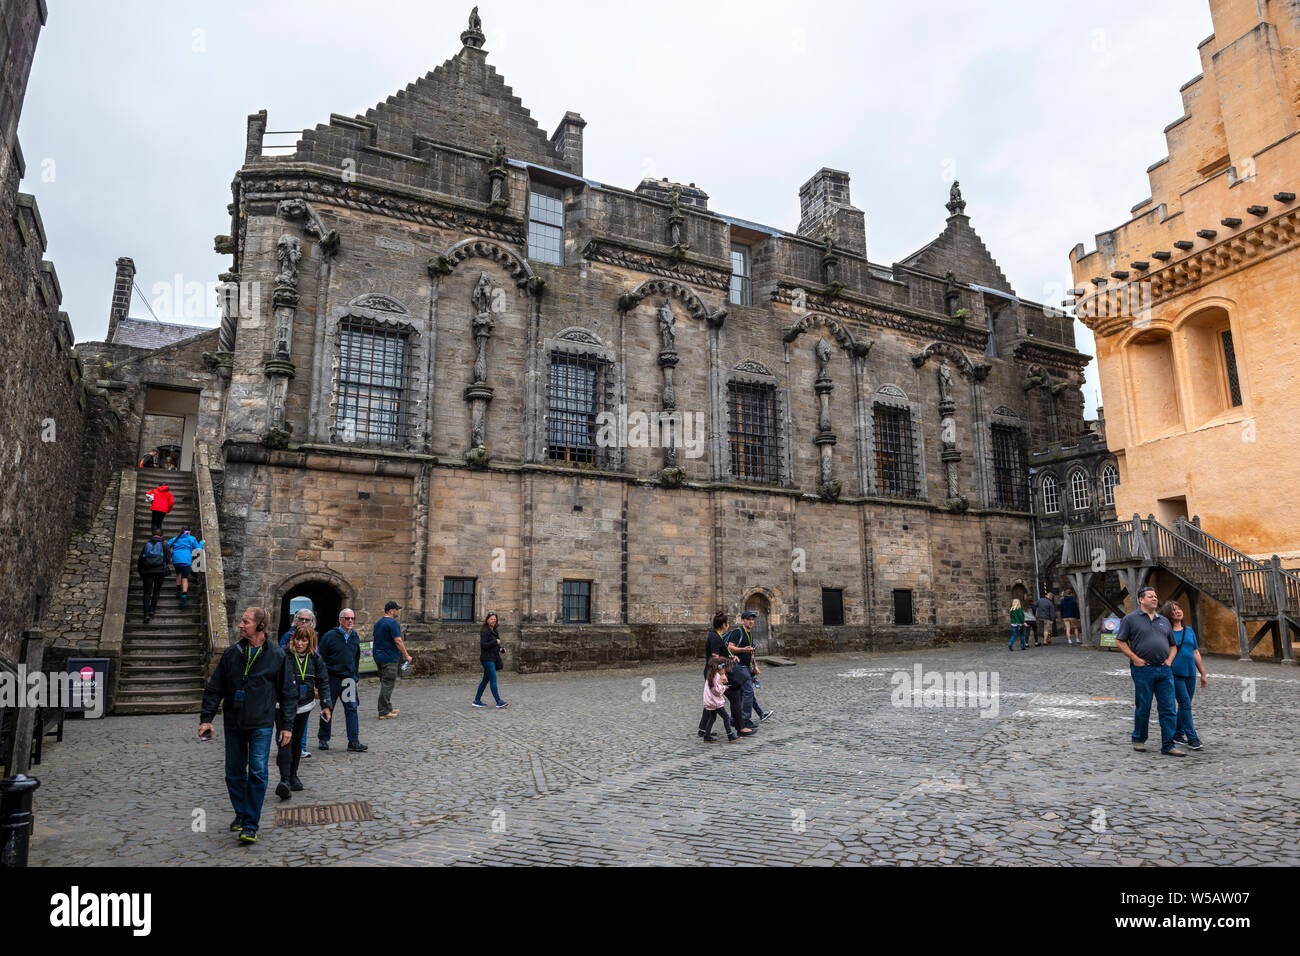 The Royal Palace viewed from the Outer Close, with the Great Hall on the right – Stirling Castle, Scotland, UK Stock Photo